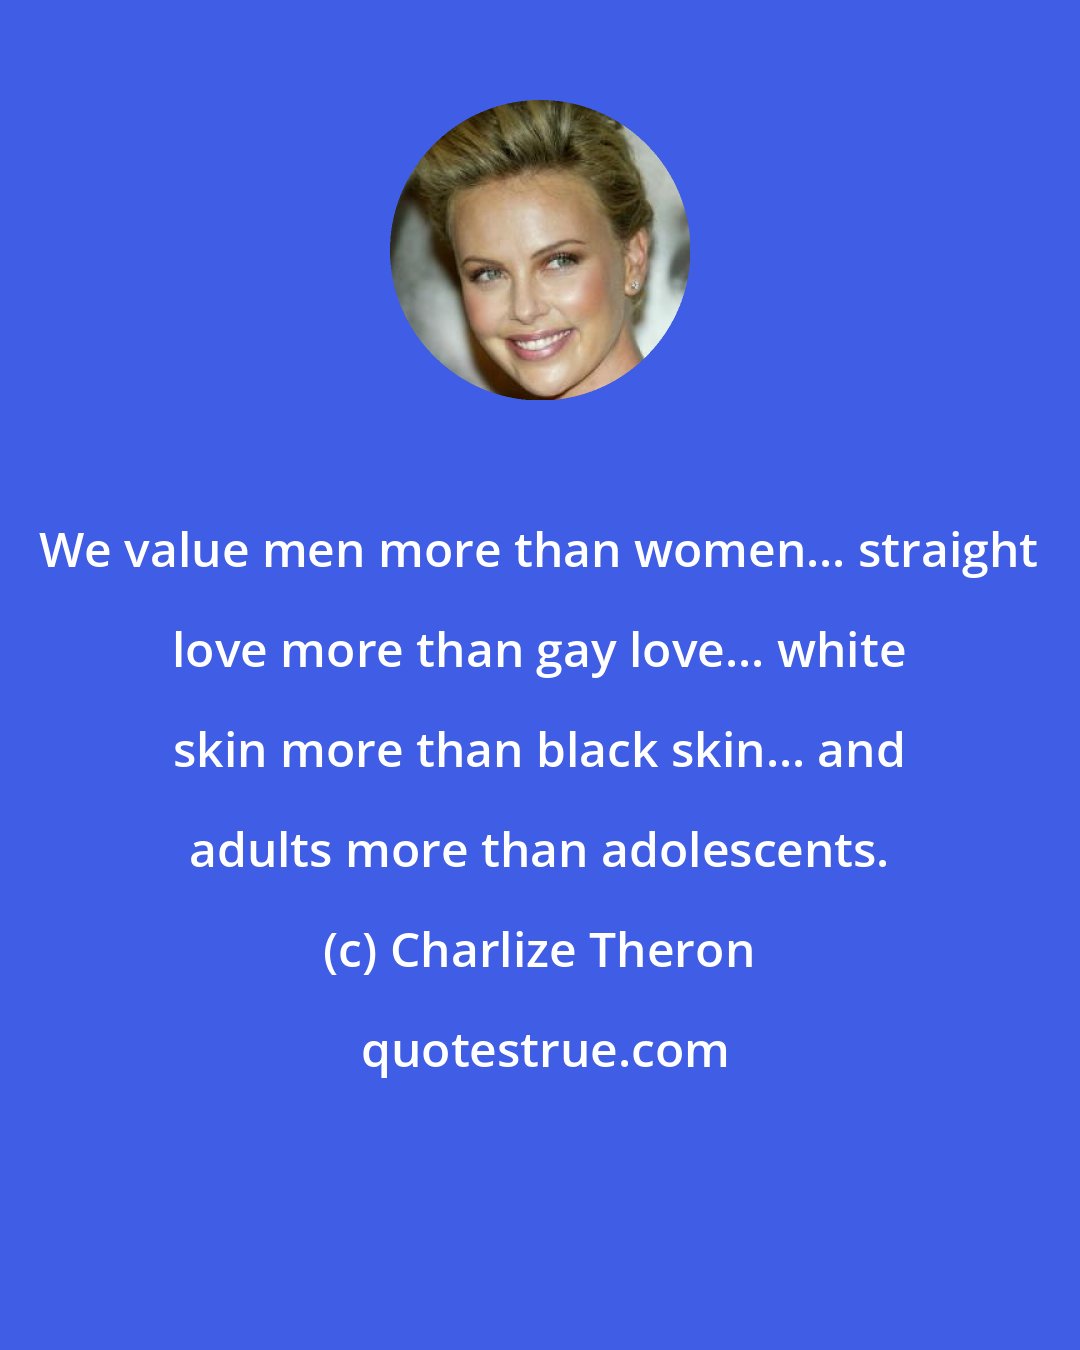 Charlize Theron: We value men more than women... straight love more than gay love... white skin more than black skin... and adults more than adolescents.